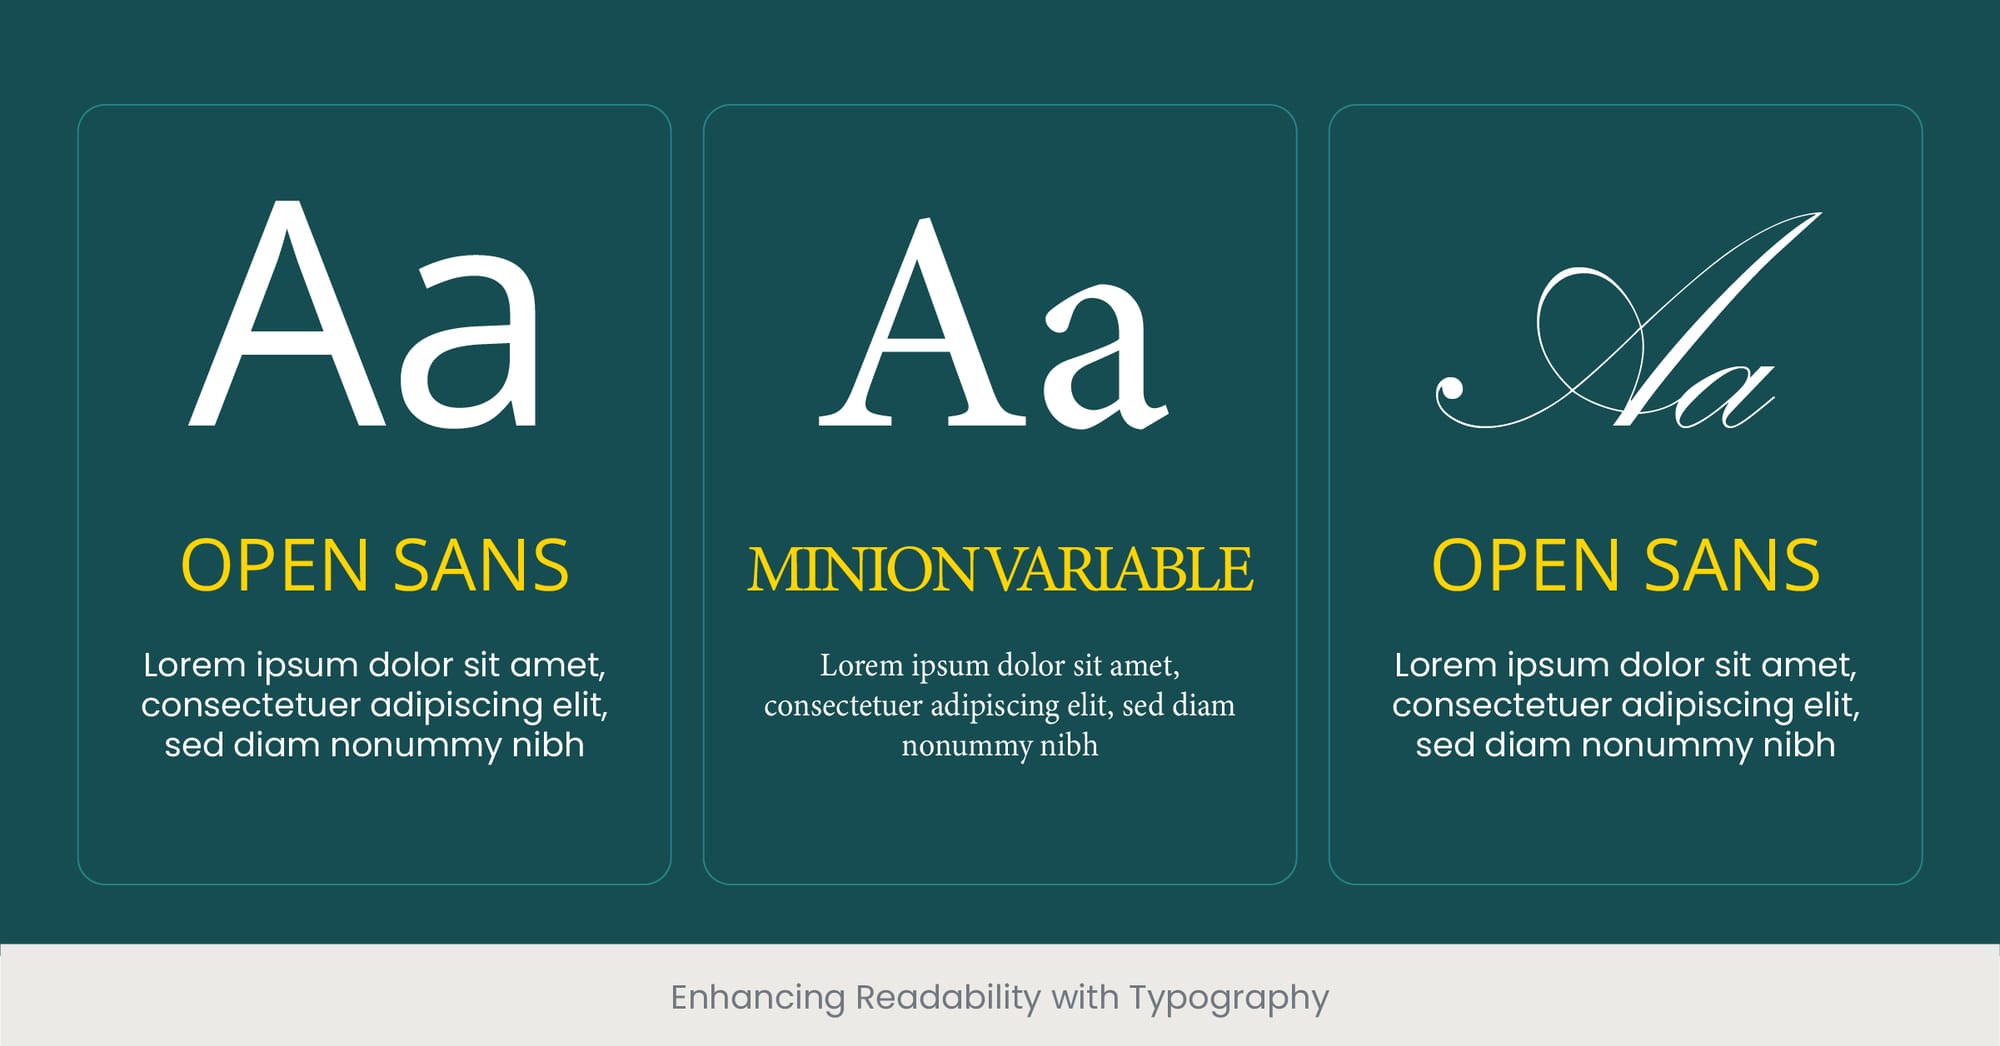 Enhancing Readability with Typography